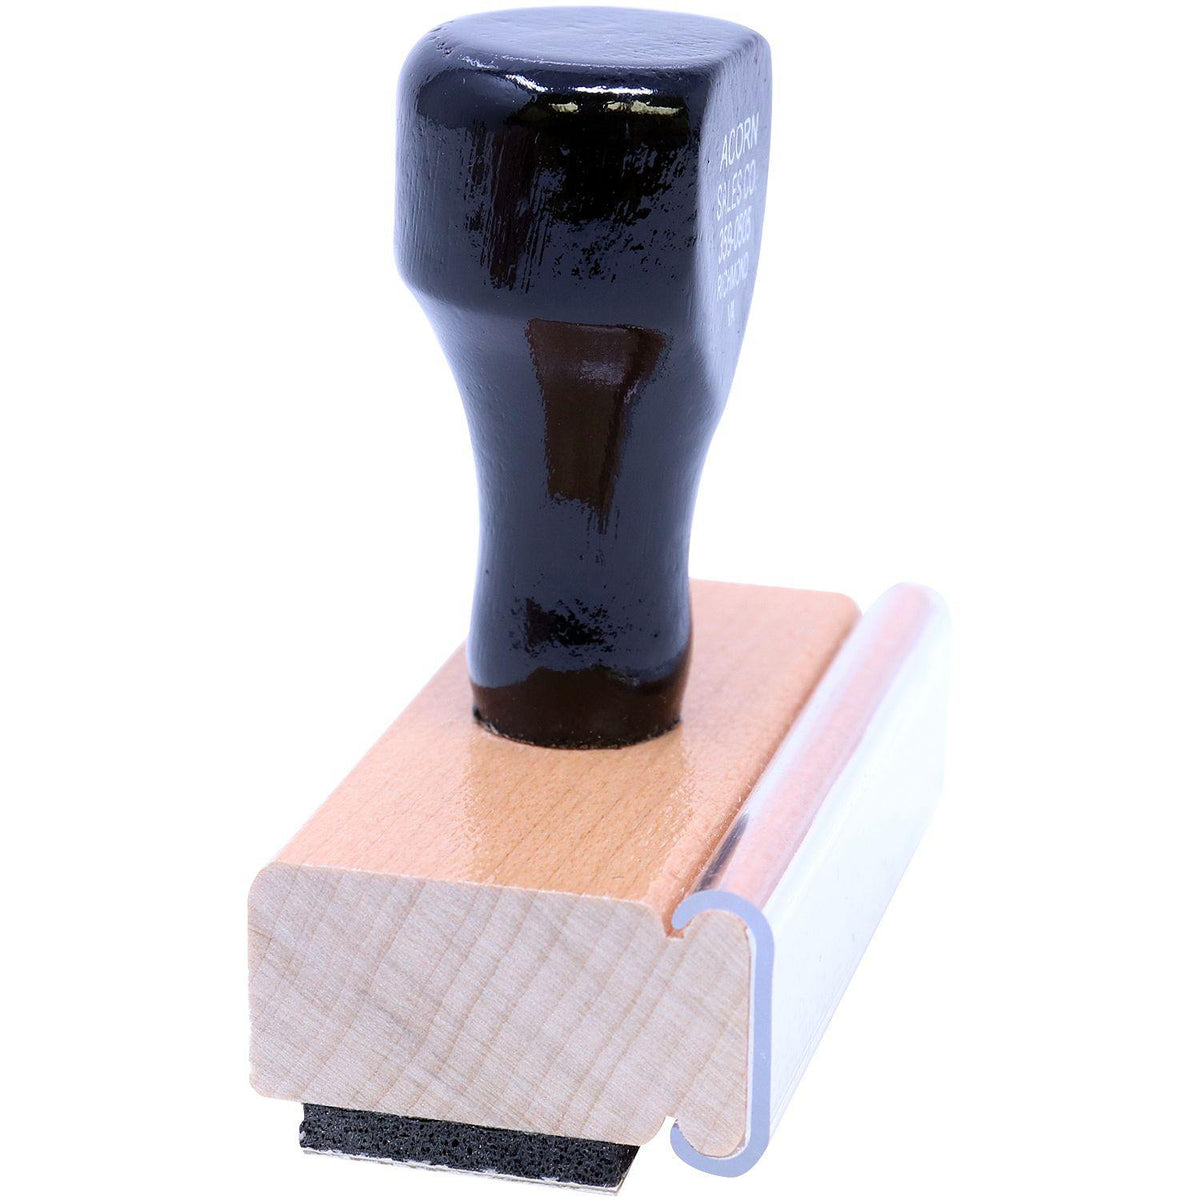 Side View of Large Credit Report Rubber Stamp at an Angle